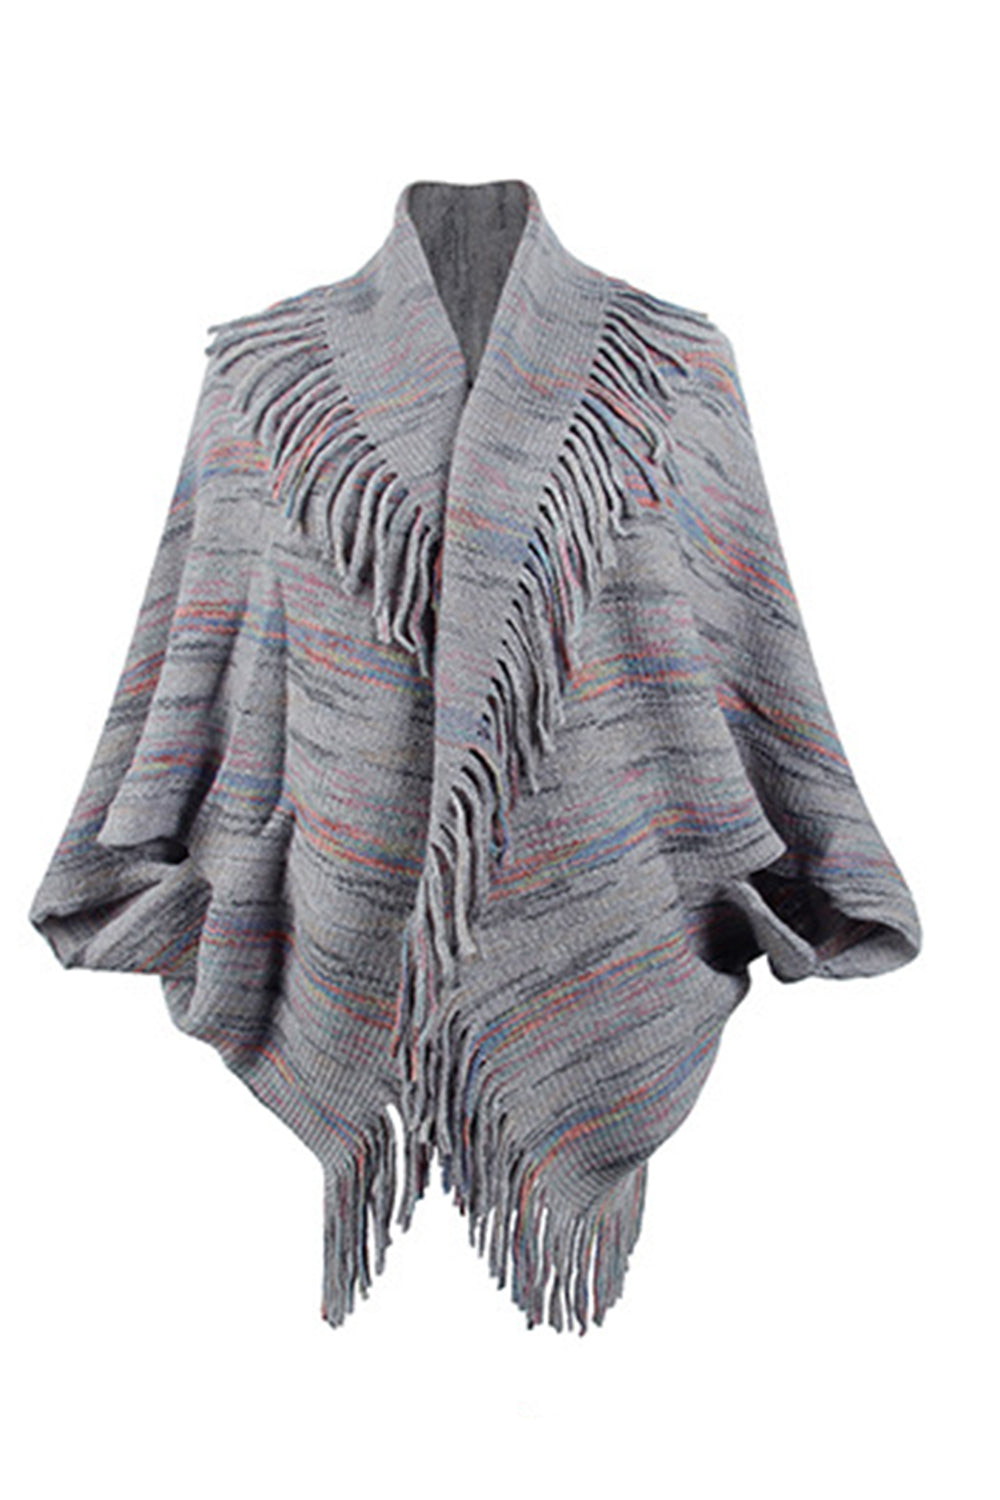 Charcoal open front fringe poncho